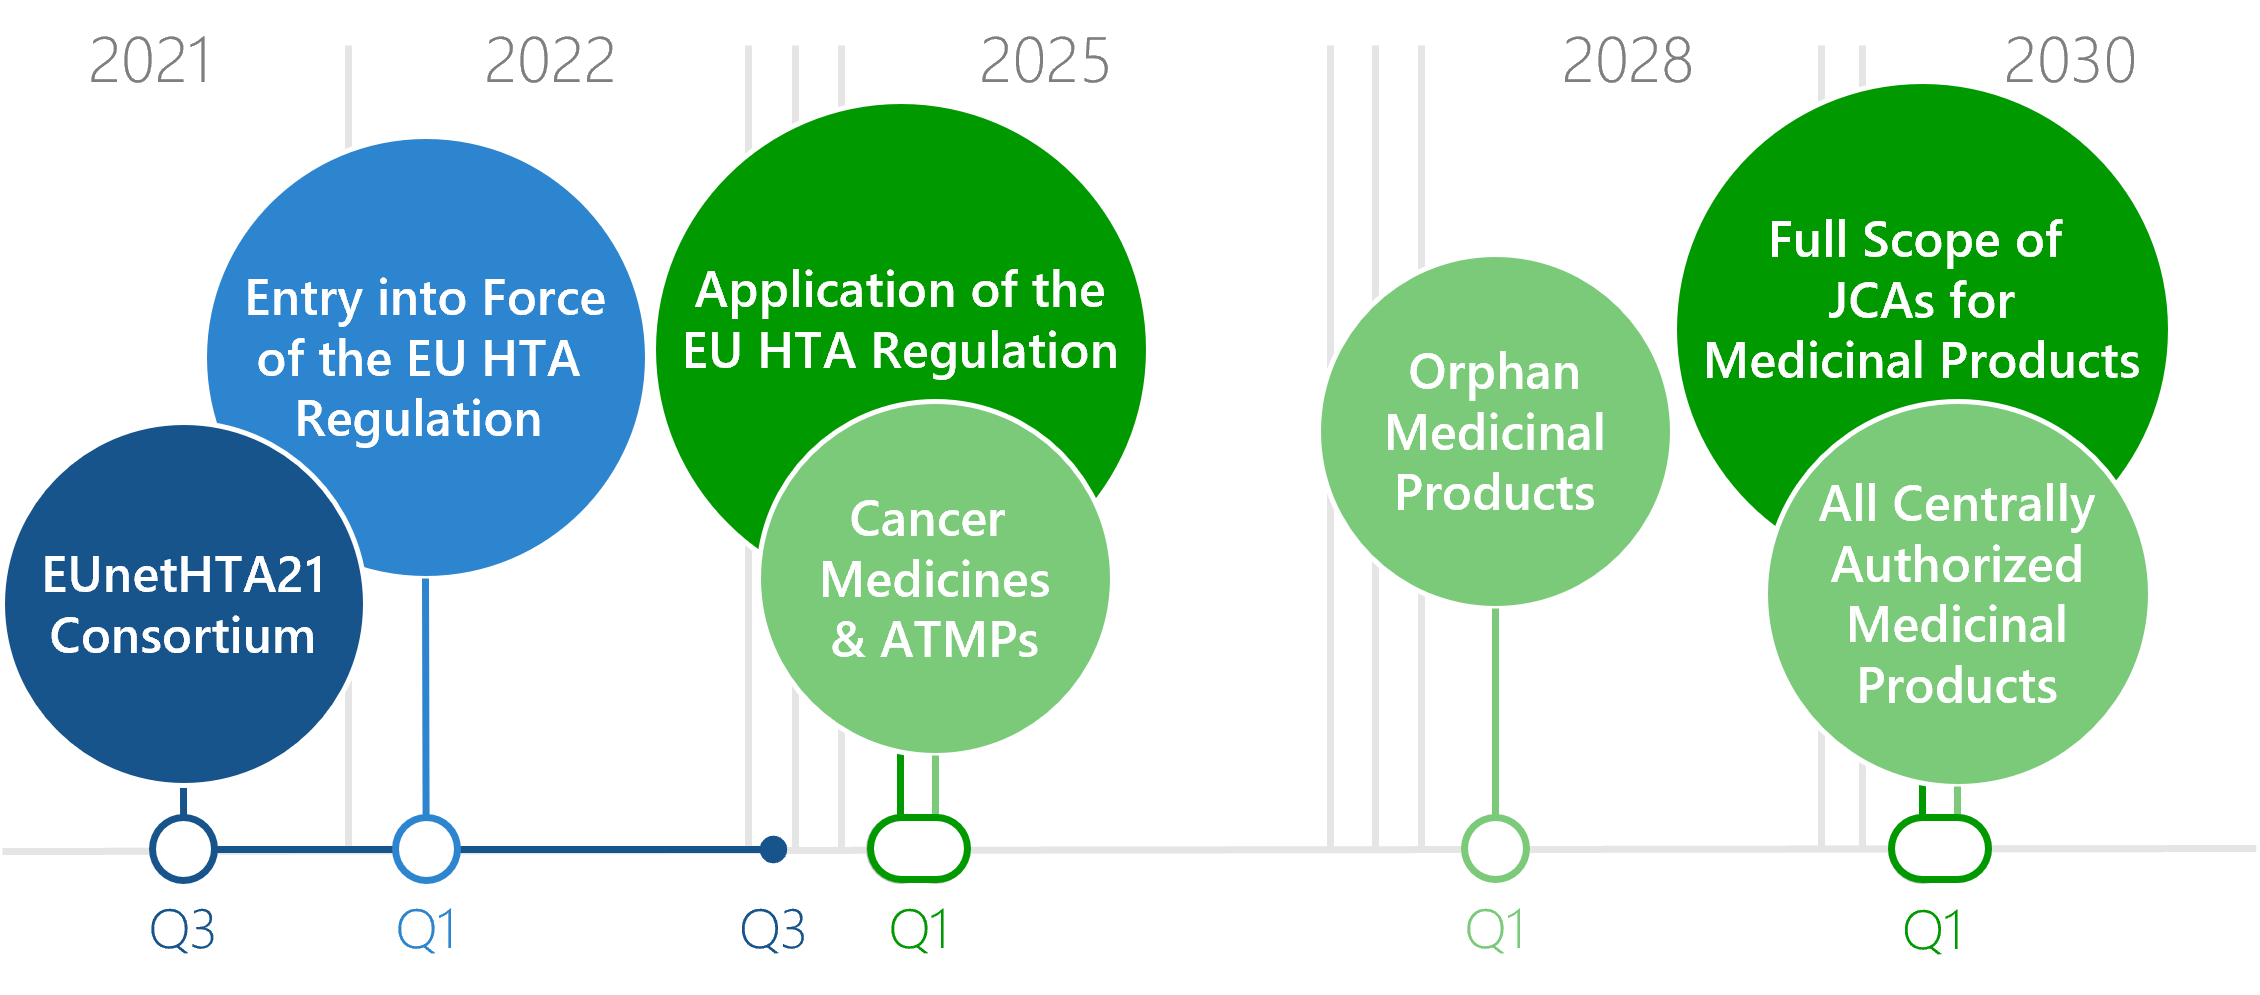 Graphical representation of the timelines of the entry into force of the EU HTA. 